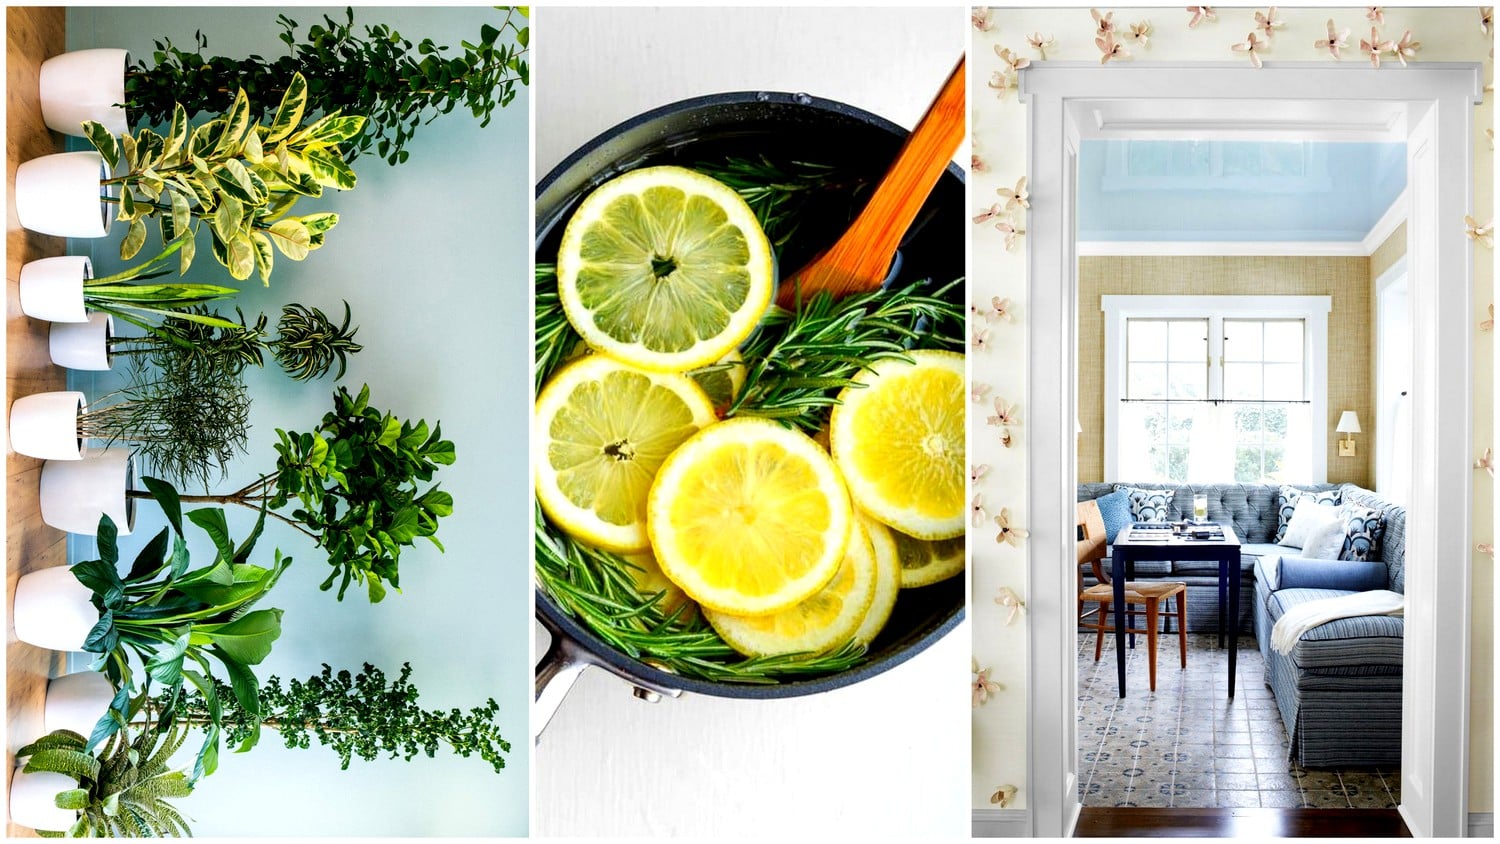 Simple and efficient ways to prepare your household for spring